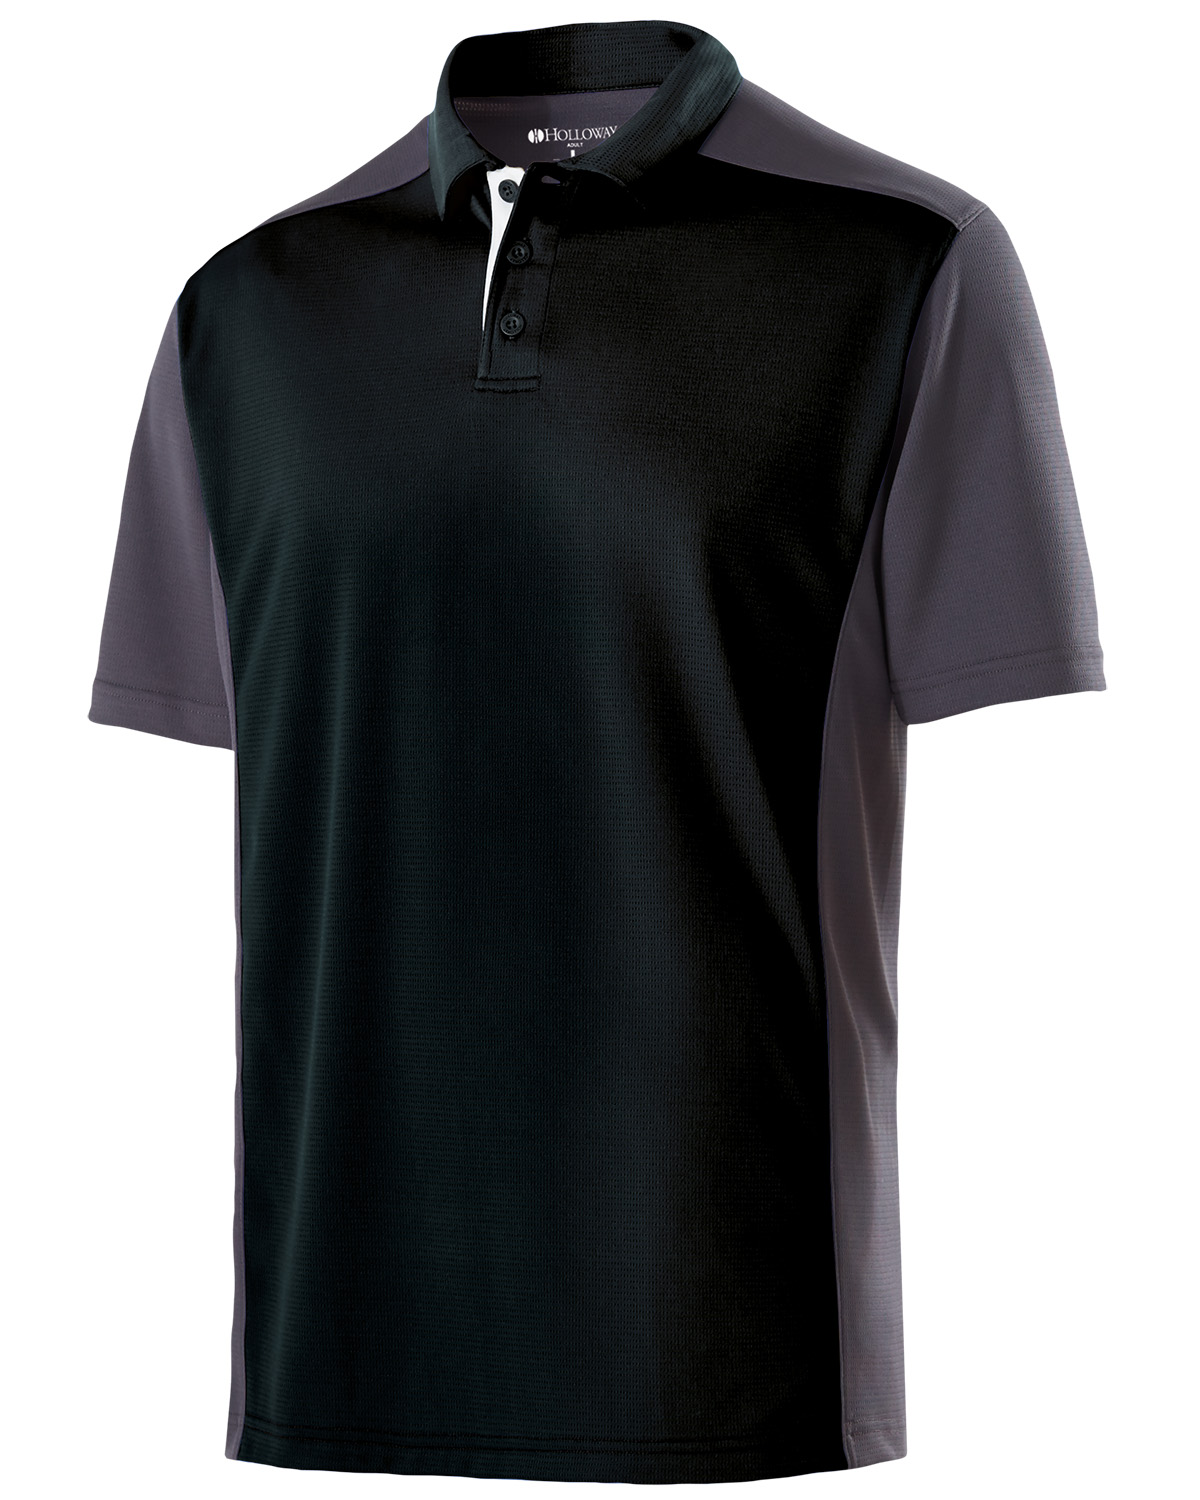 Holloway 222486 - Adult Polyester Closed-Hole Division Polo